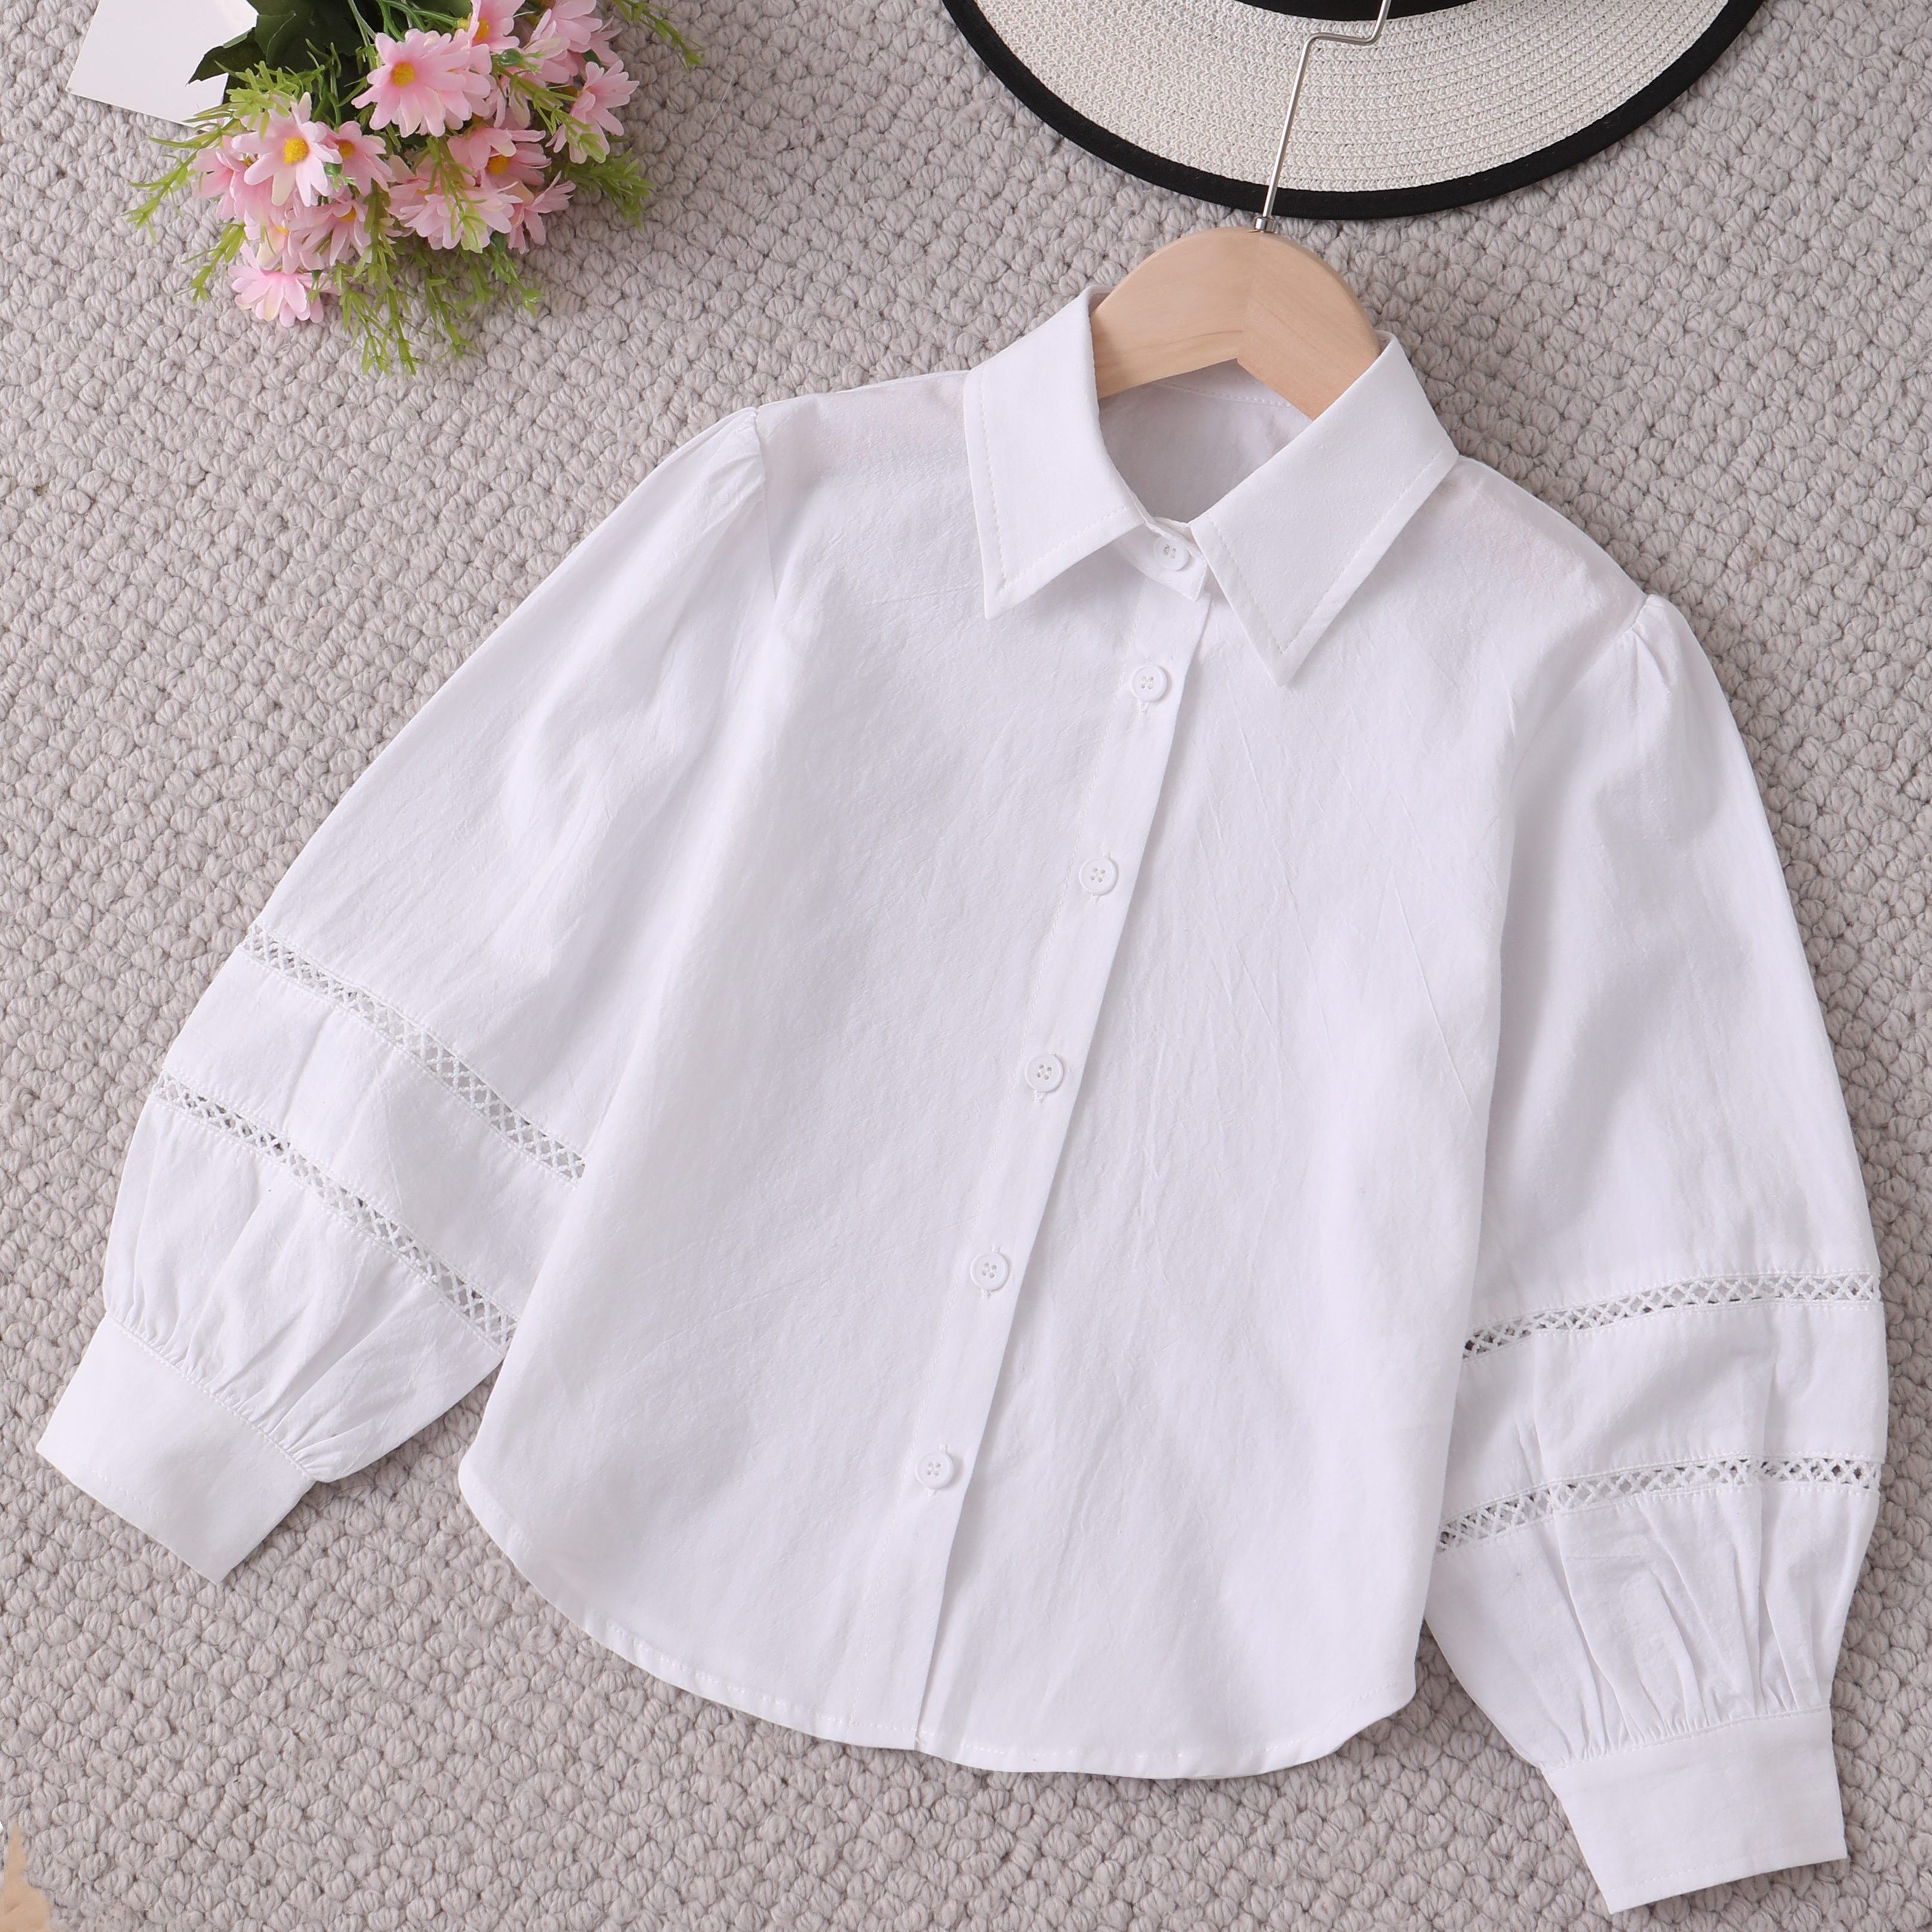 

Girl's Boho Hollow-out Bubble Sleeve Shirt, 100% Pure Cotton Solid White Loose Casual Button Collar Blouse